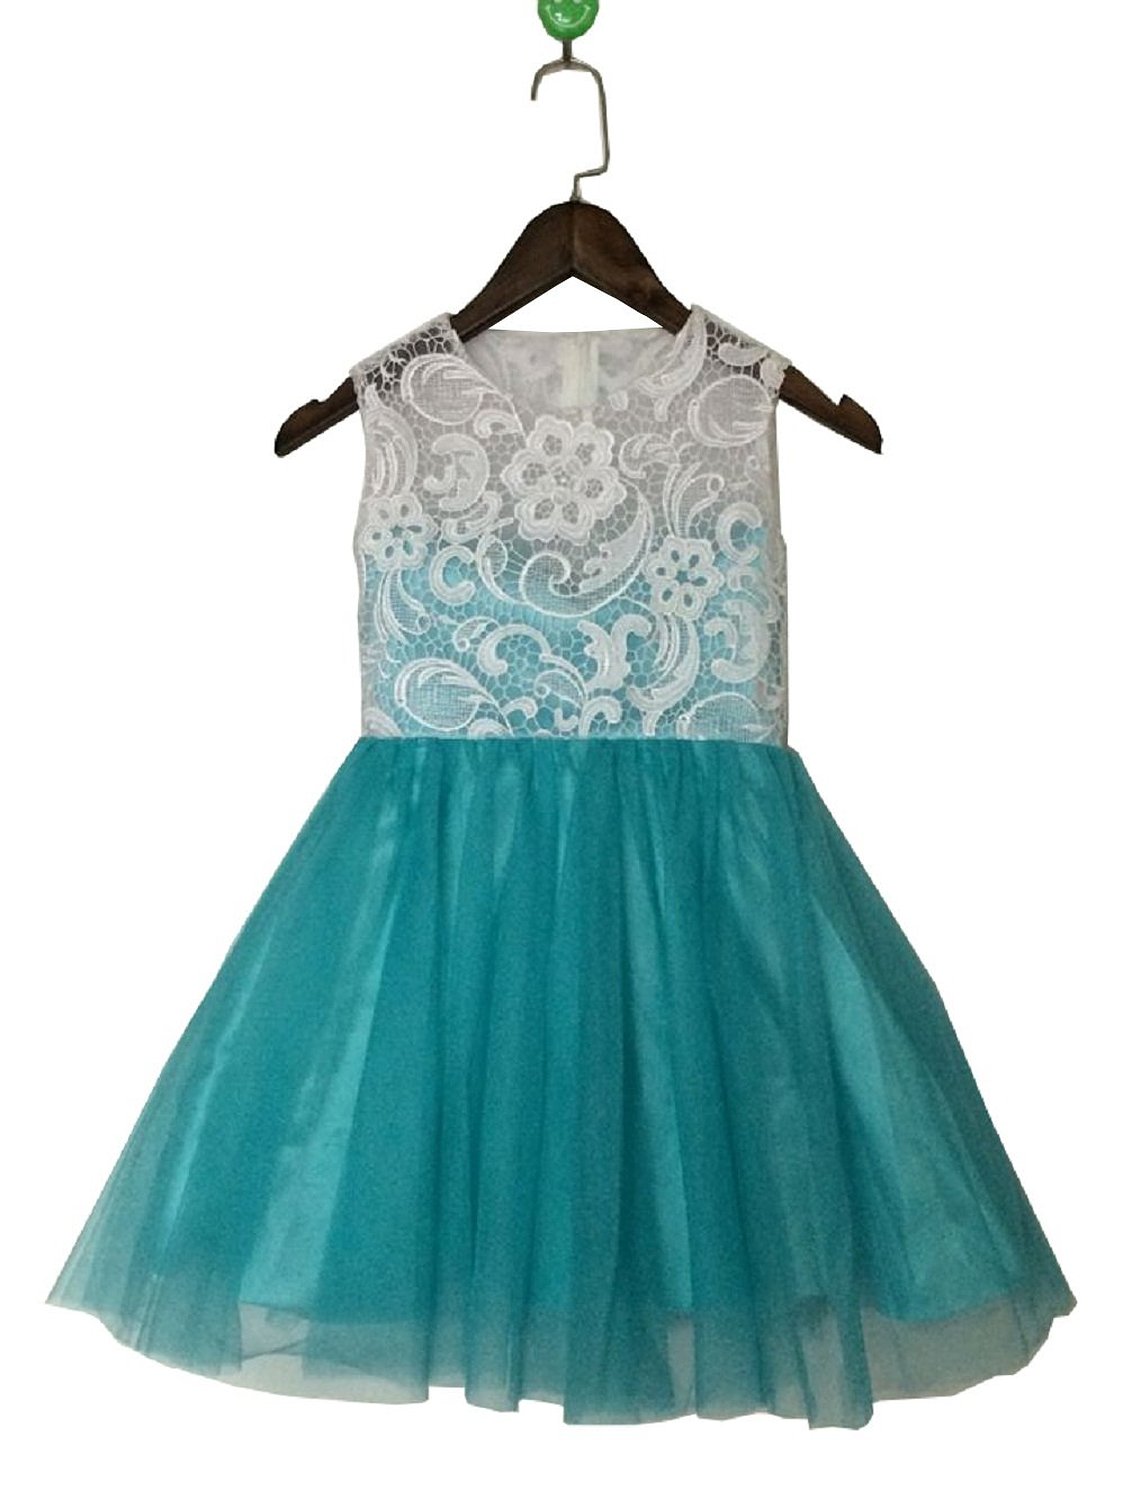 Ulass Lace A-line Tulle Flower Girl Dresses Flower Girl Children Clothing Dress Flower Girl Dress Easter Party Dress Infant Dress Toddler Dress